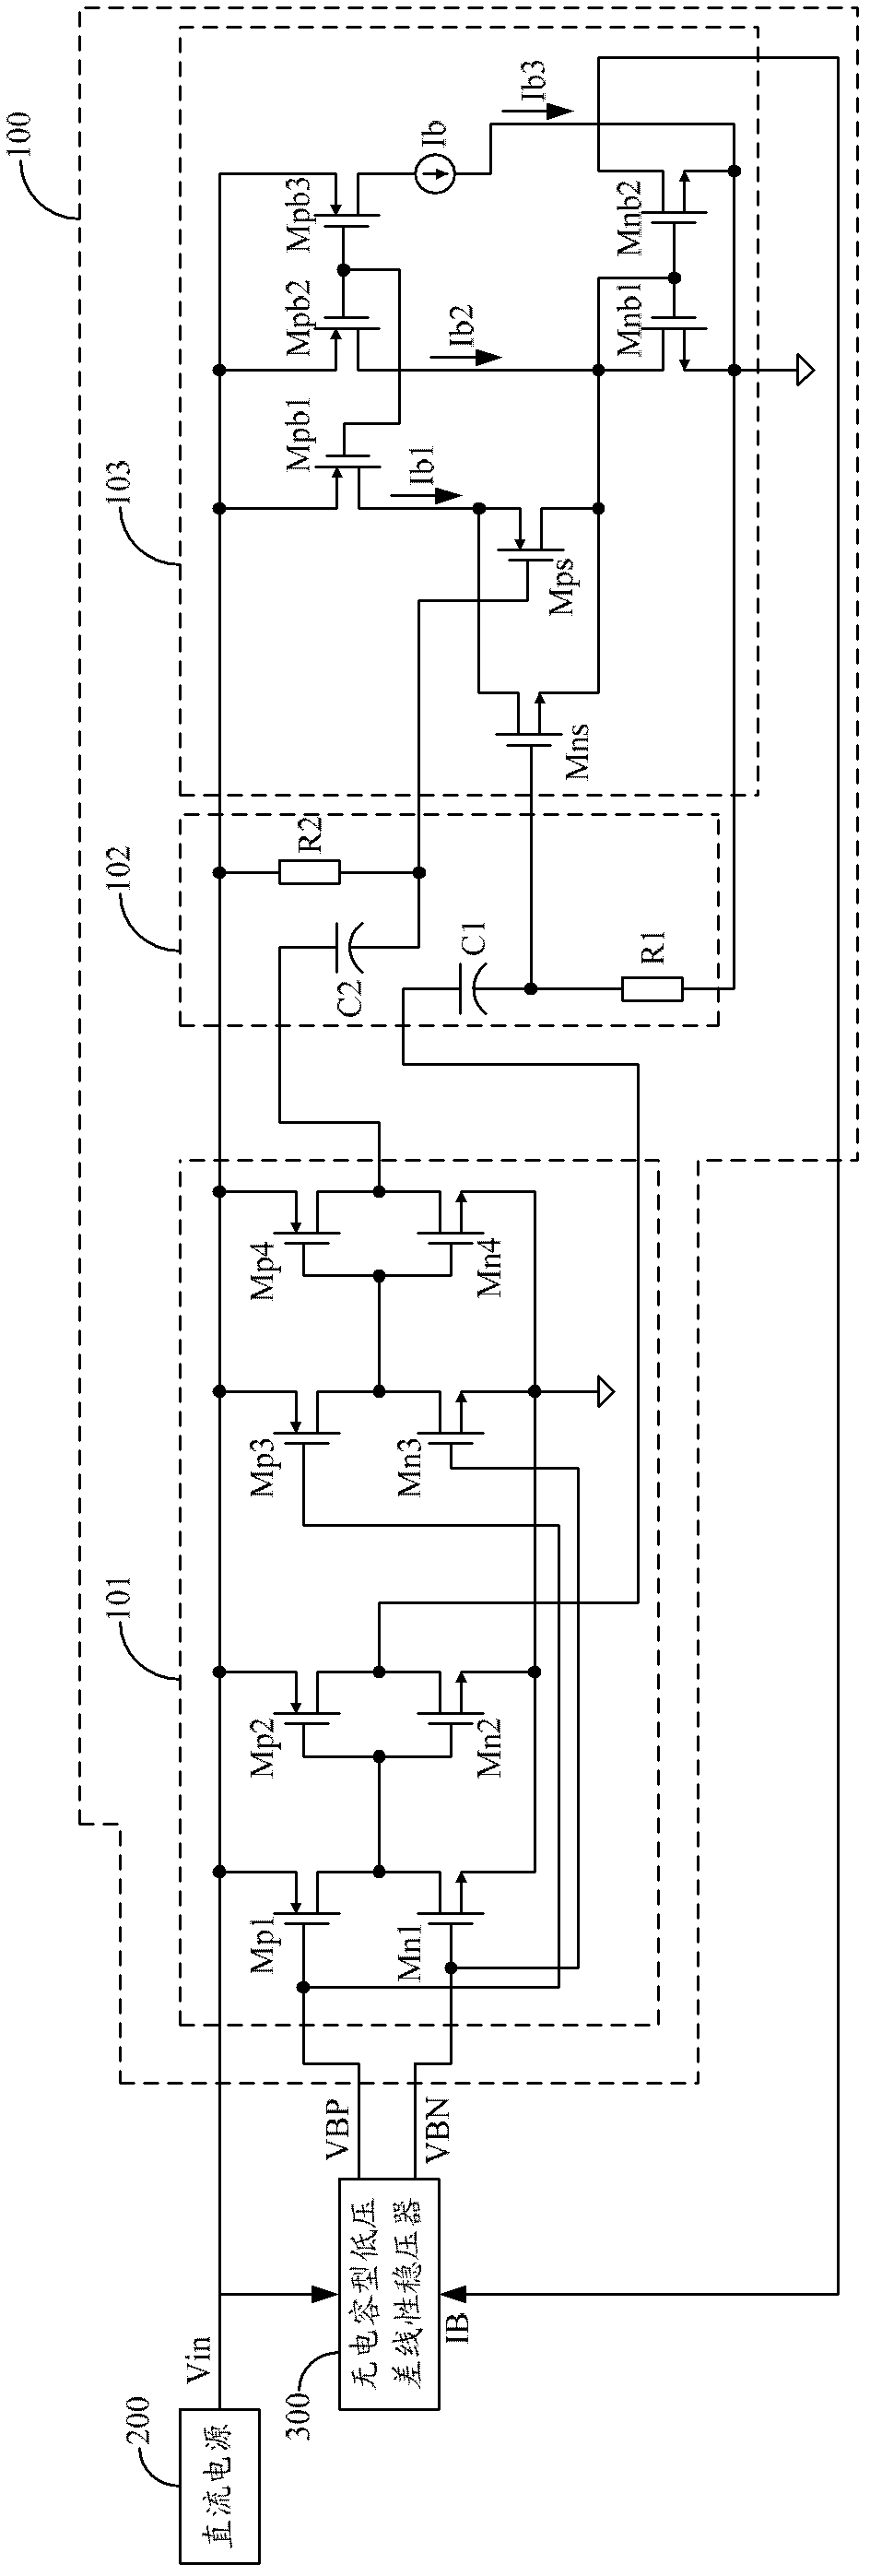 Non-capacitive low-dropout linear voltage stabilizing system and bias current regulating circuit thereof